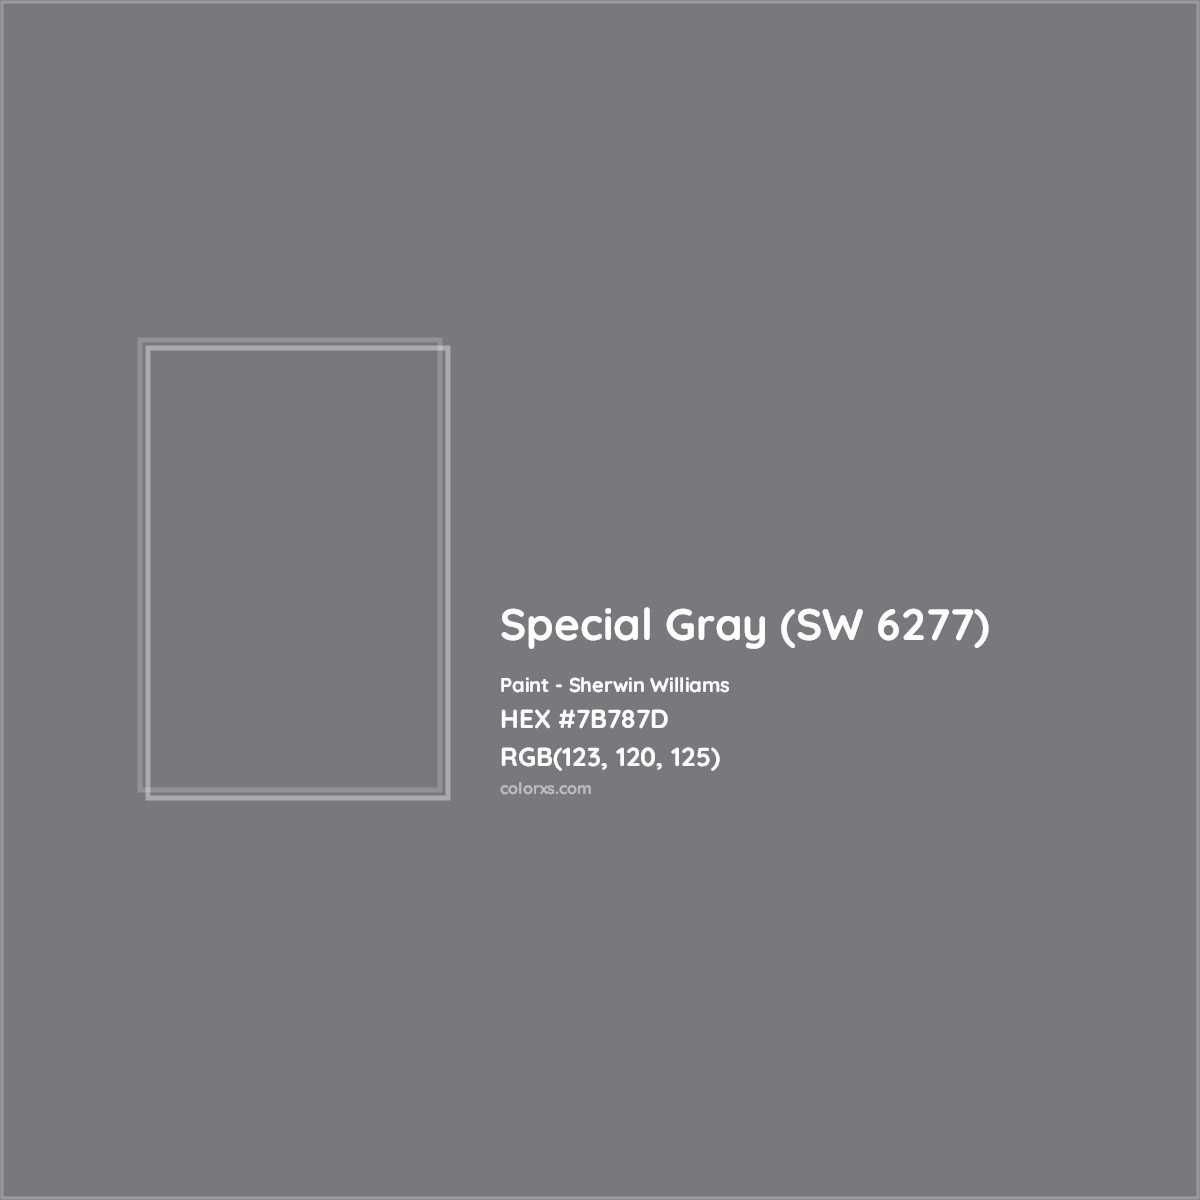 HEX #7B787D Special Gray (SW 6277) Paint Sherwin Williams - Color Code